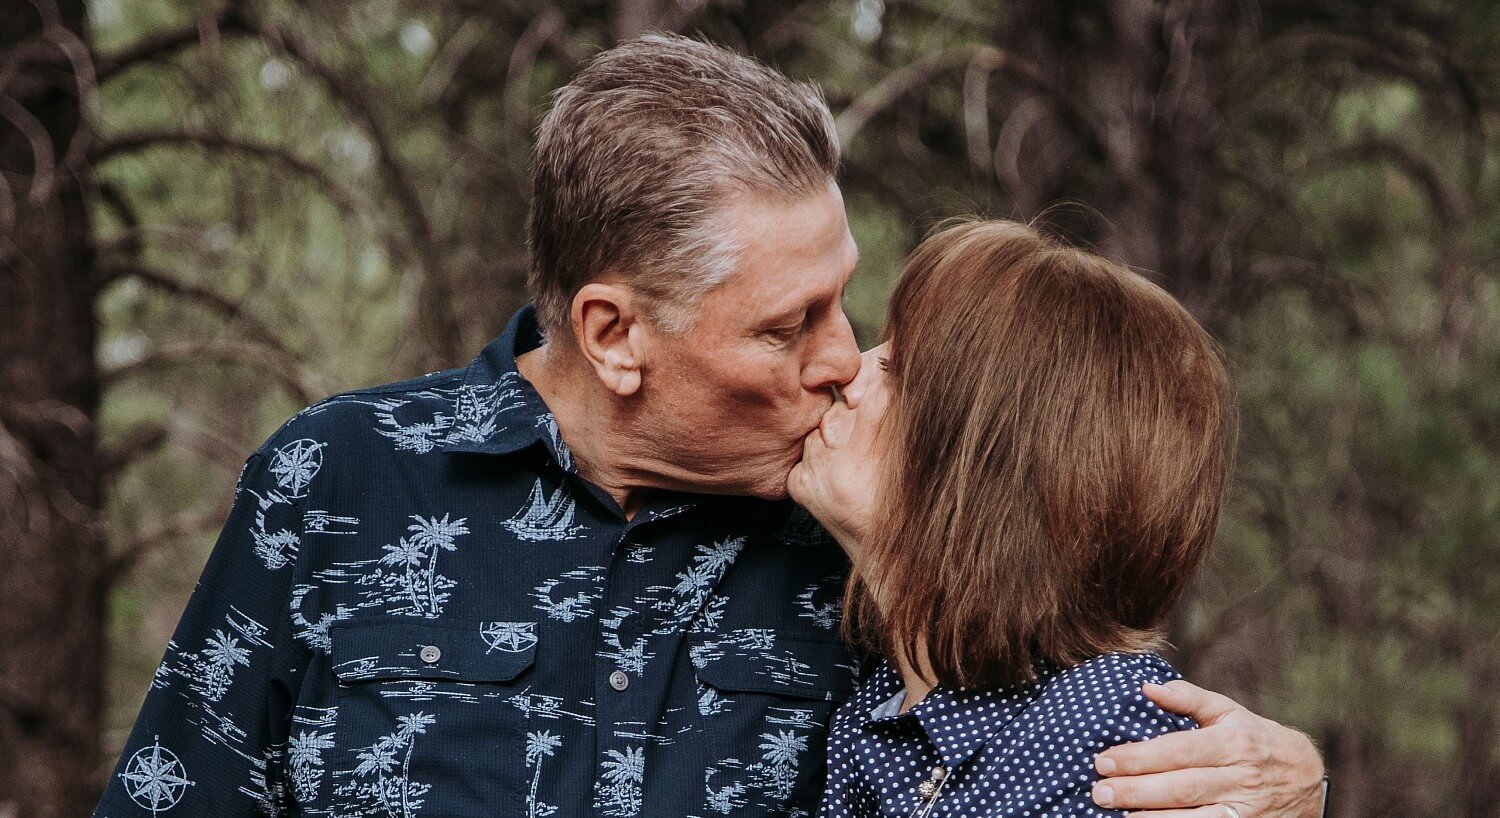 Woman with brown hair in blue and white blouse kissing a man in blue and white shirt with forest in background